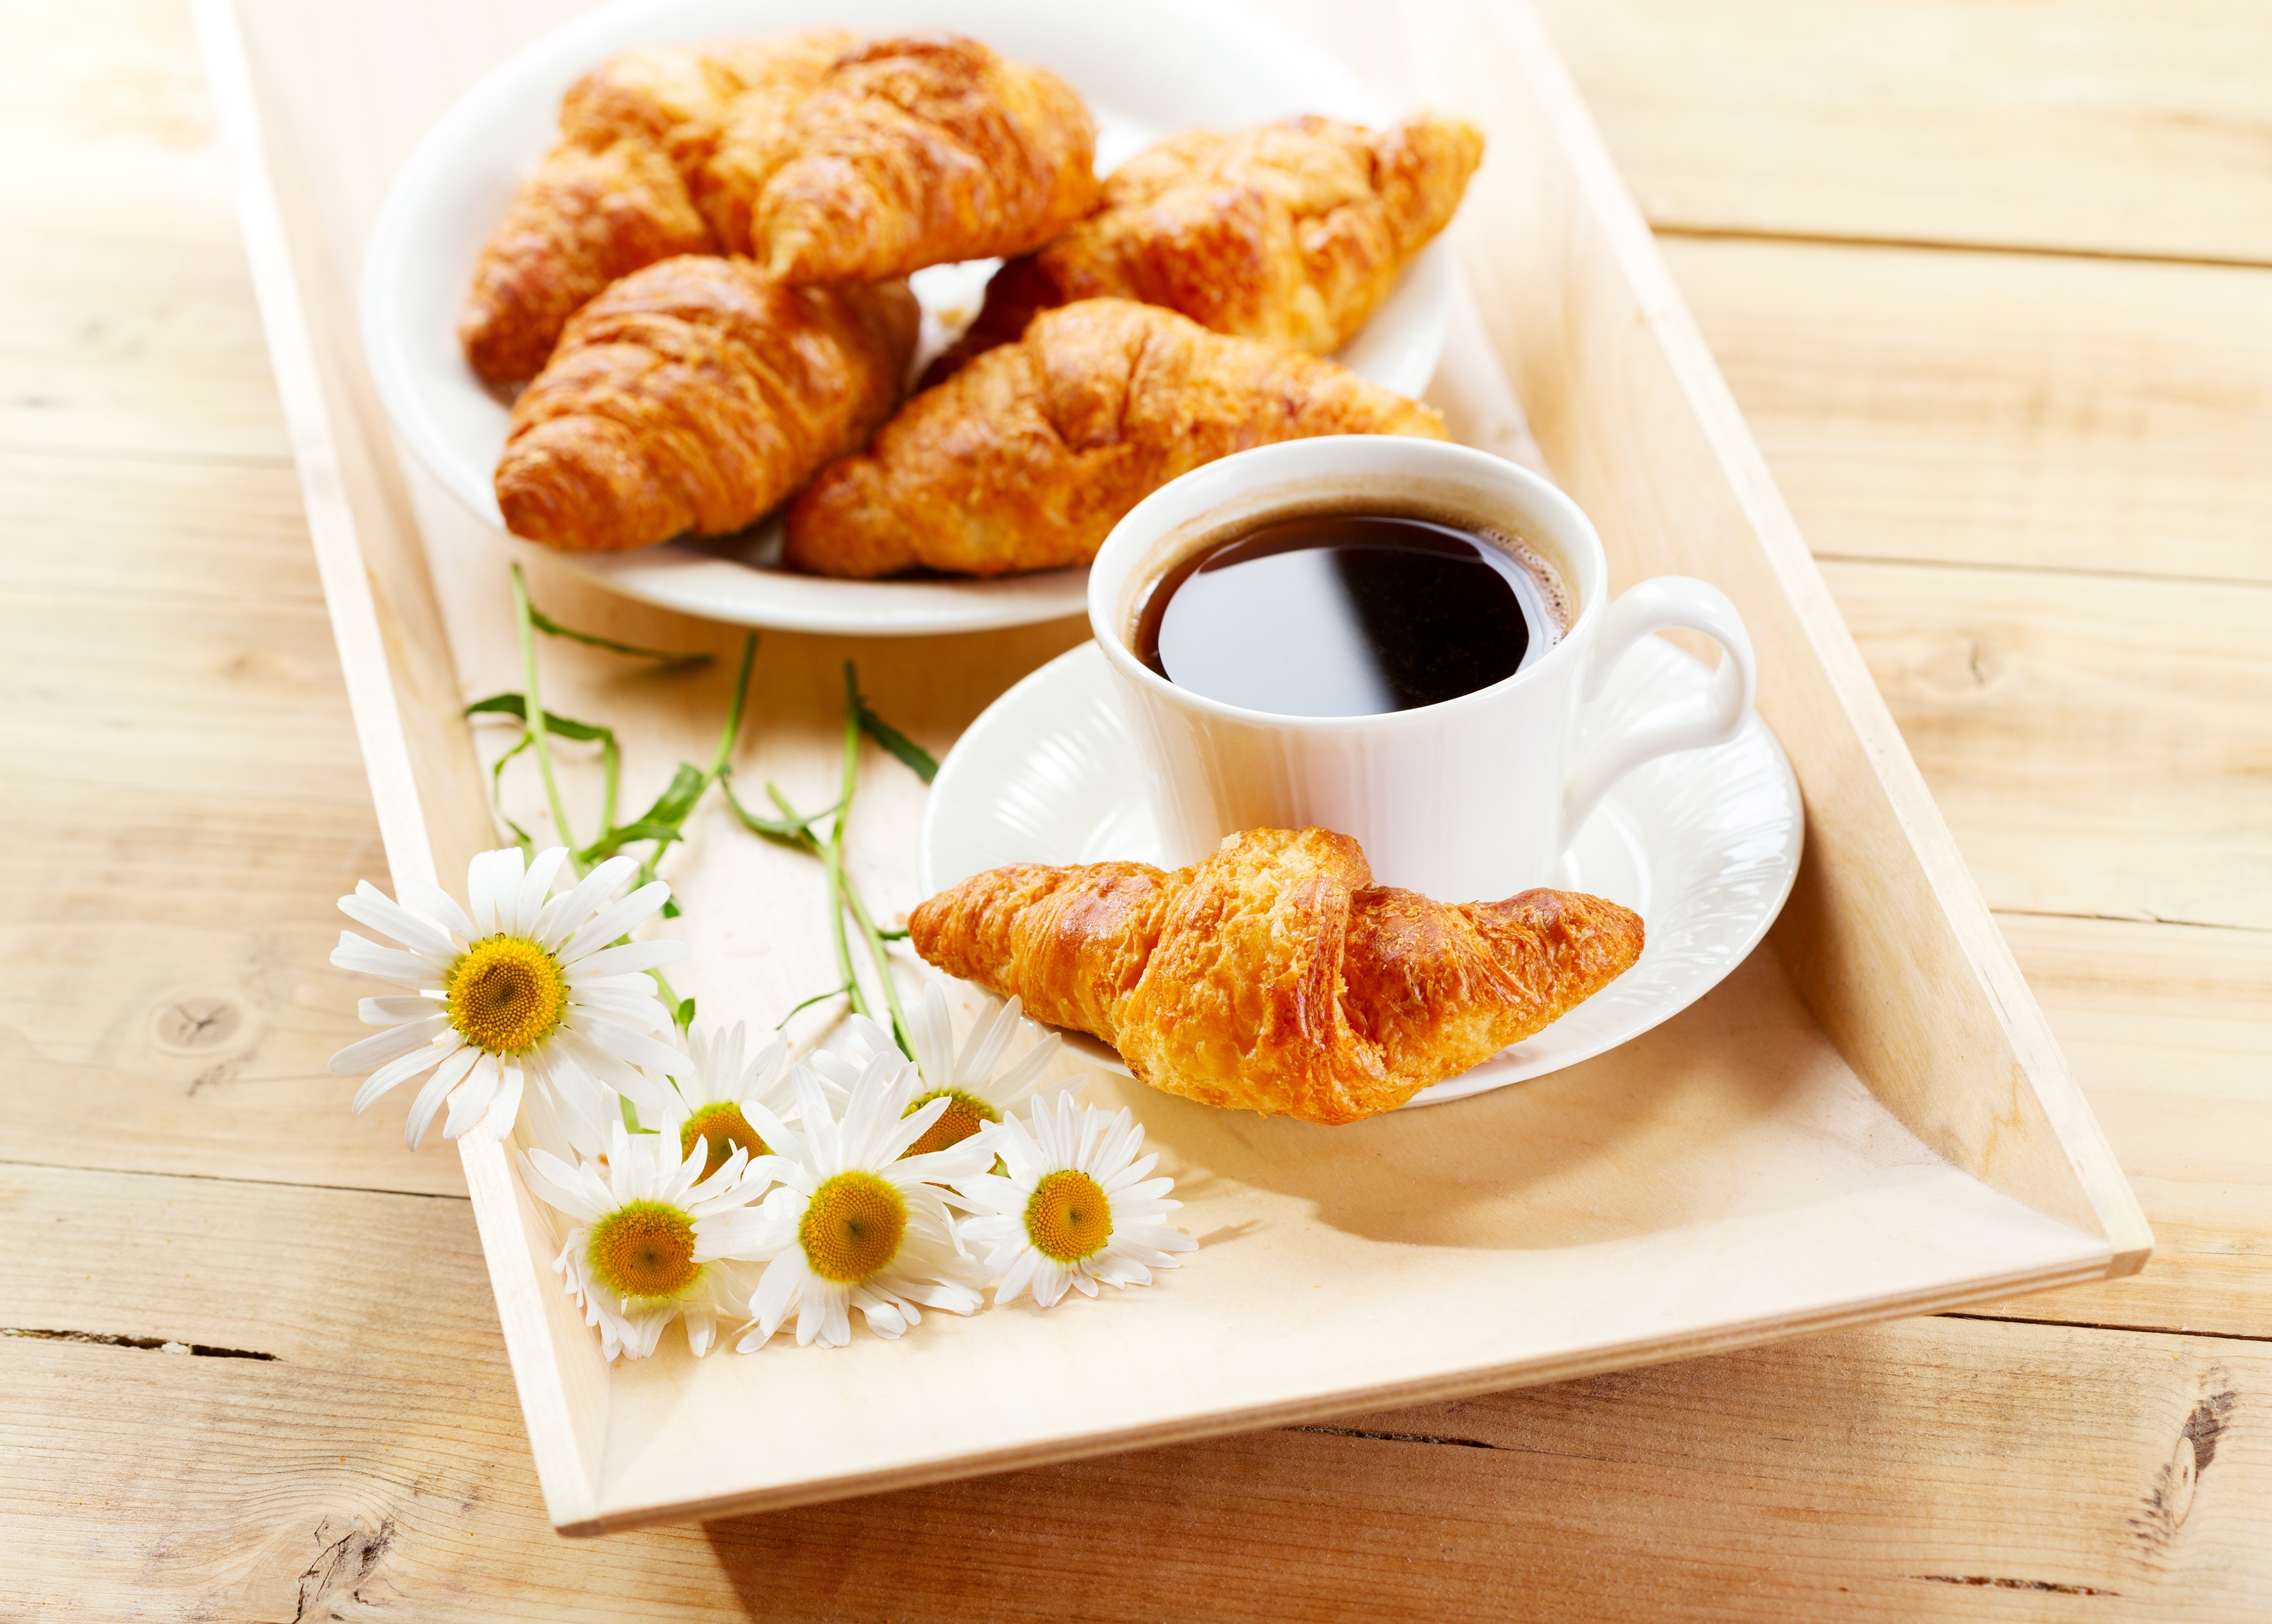 Croissant 4k Ultra HD Wallpaper And Background